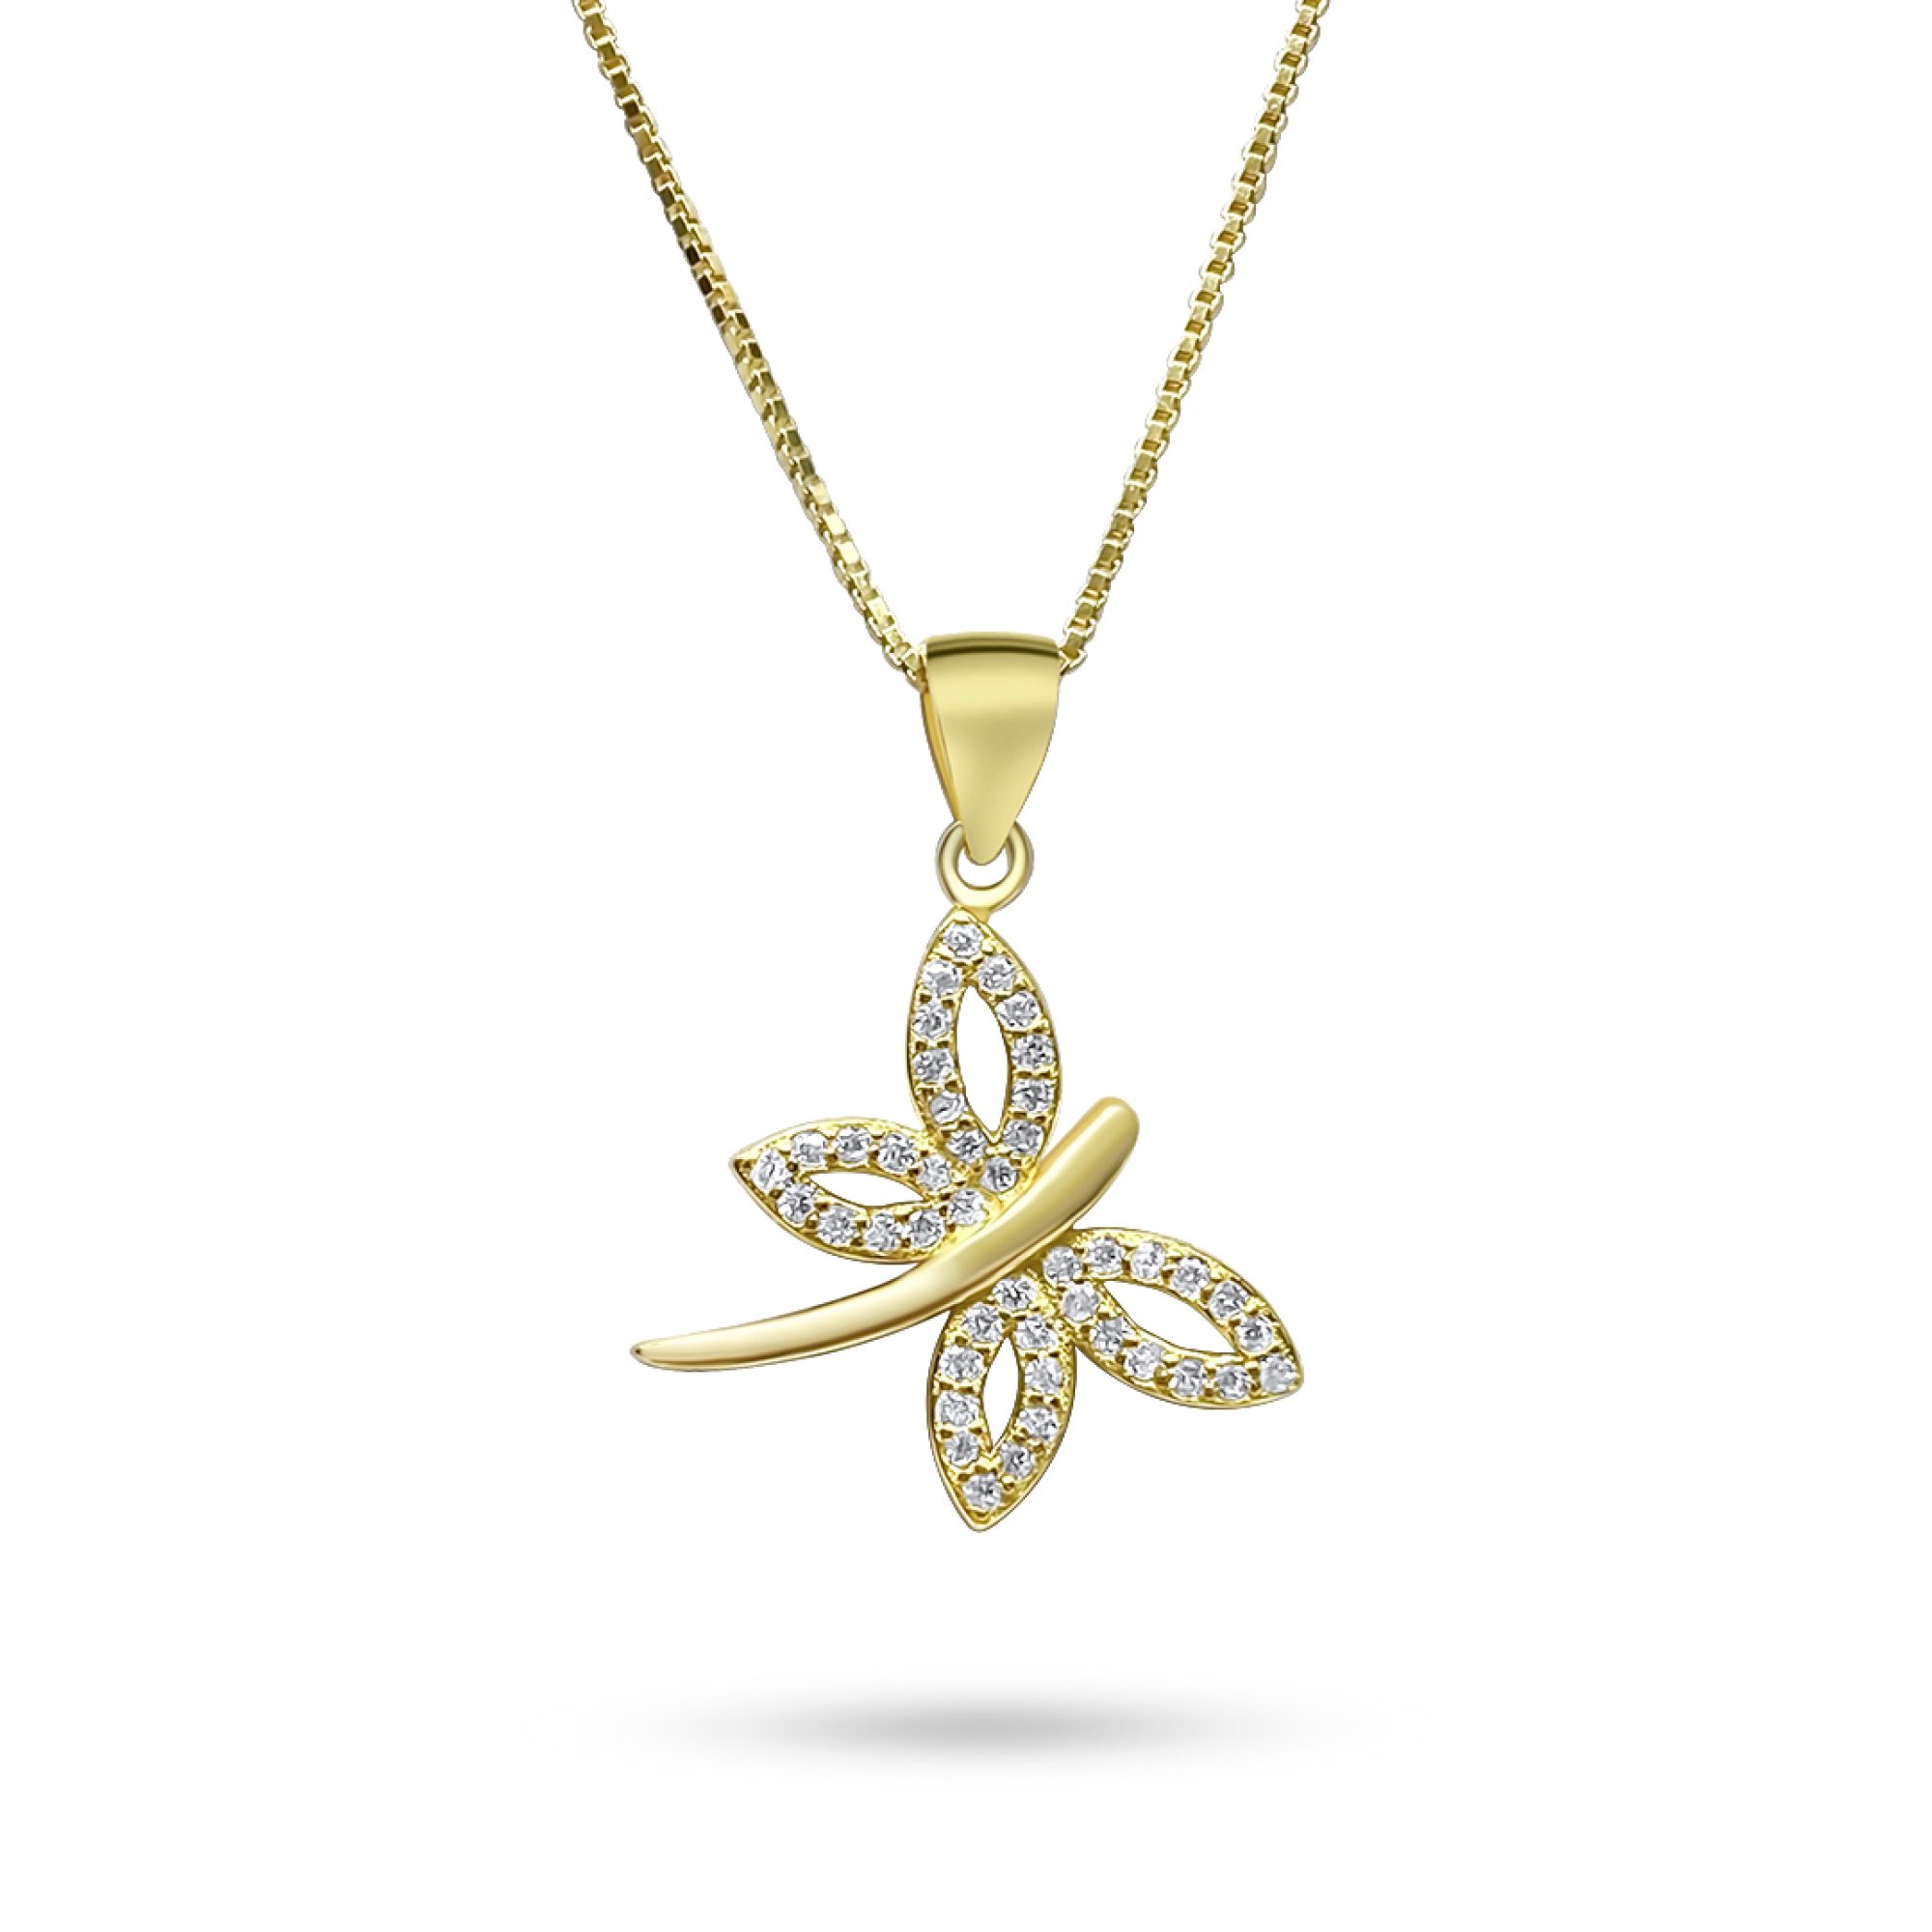 Gold plated butterfly necklace with zircon stones